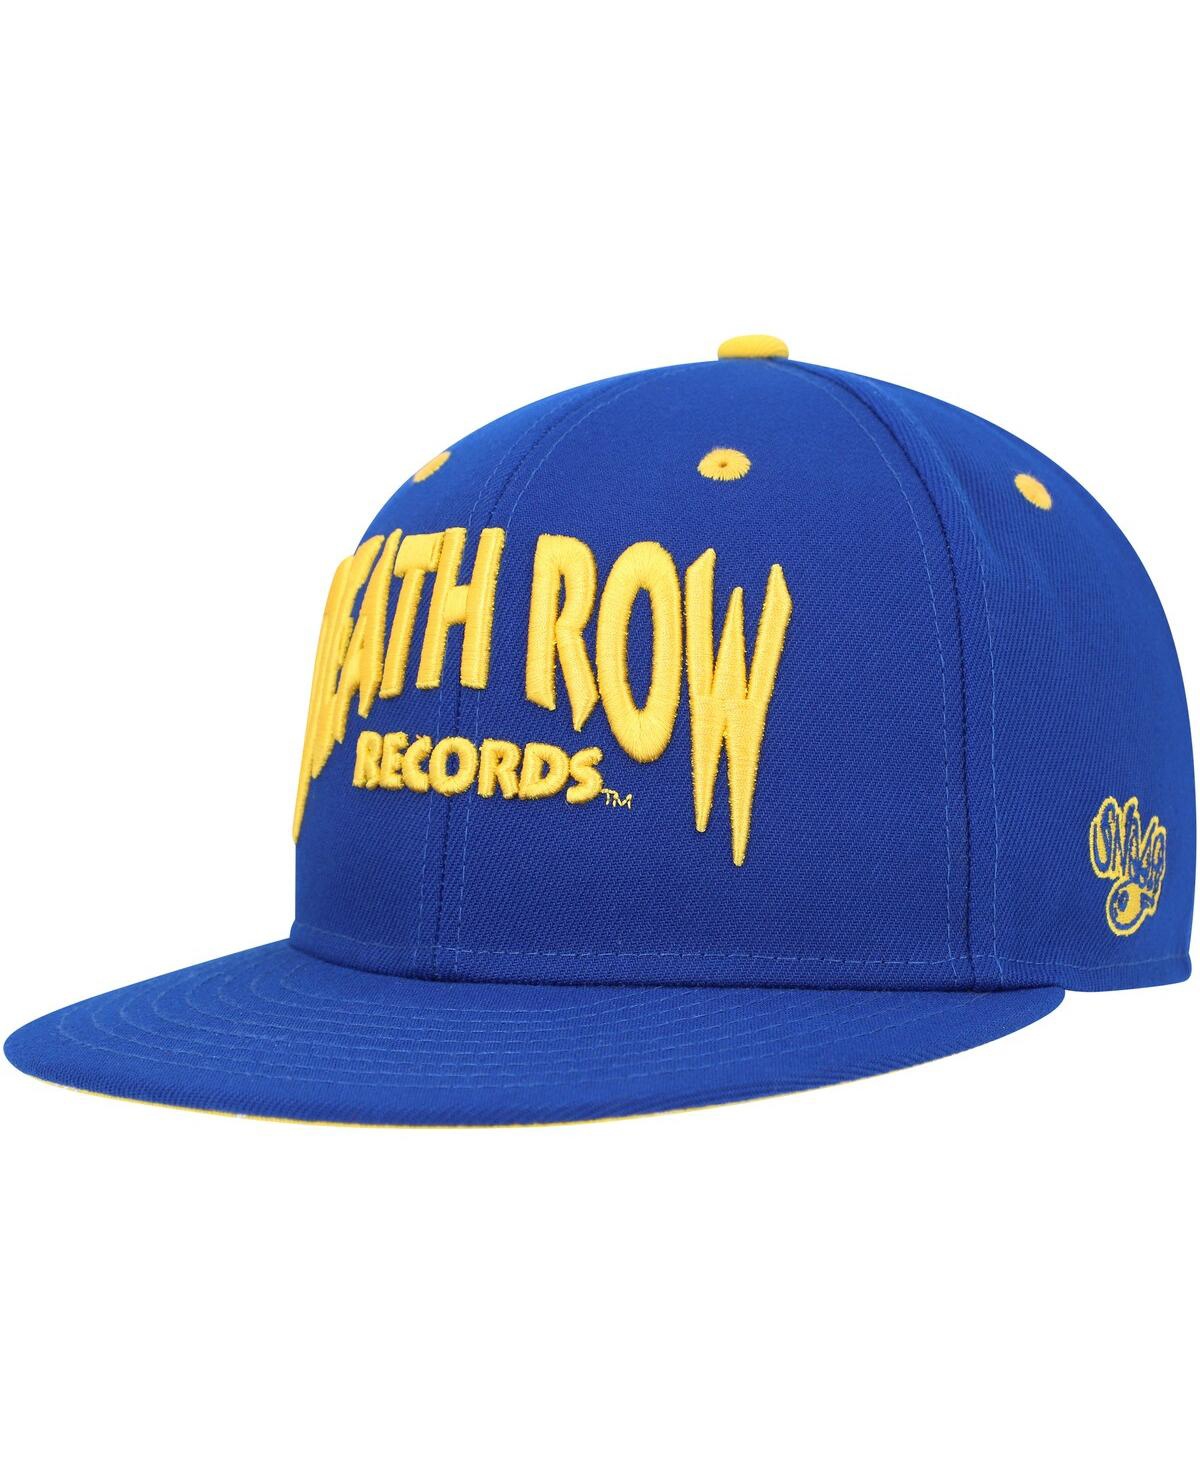 Shop Lids Men's Royal Death Row Records Paisley Fitted Hat